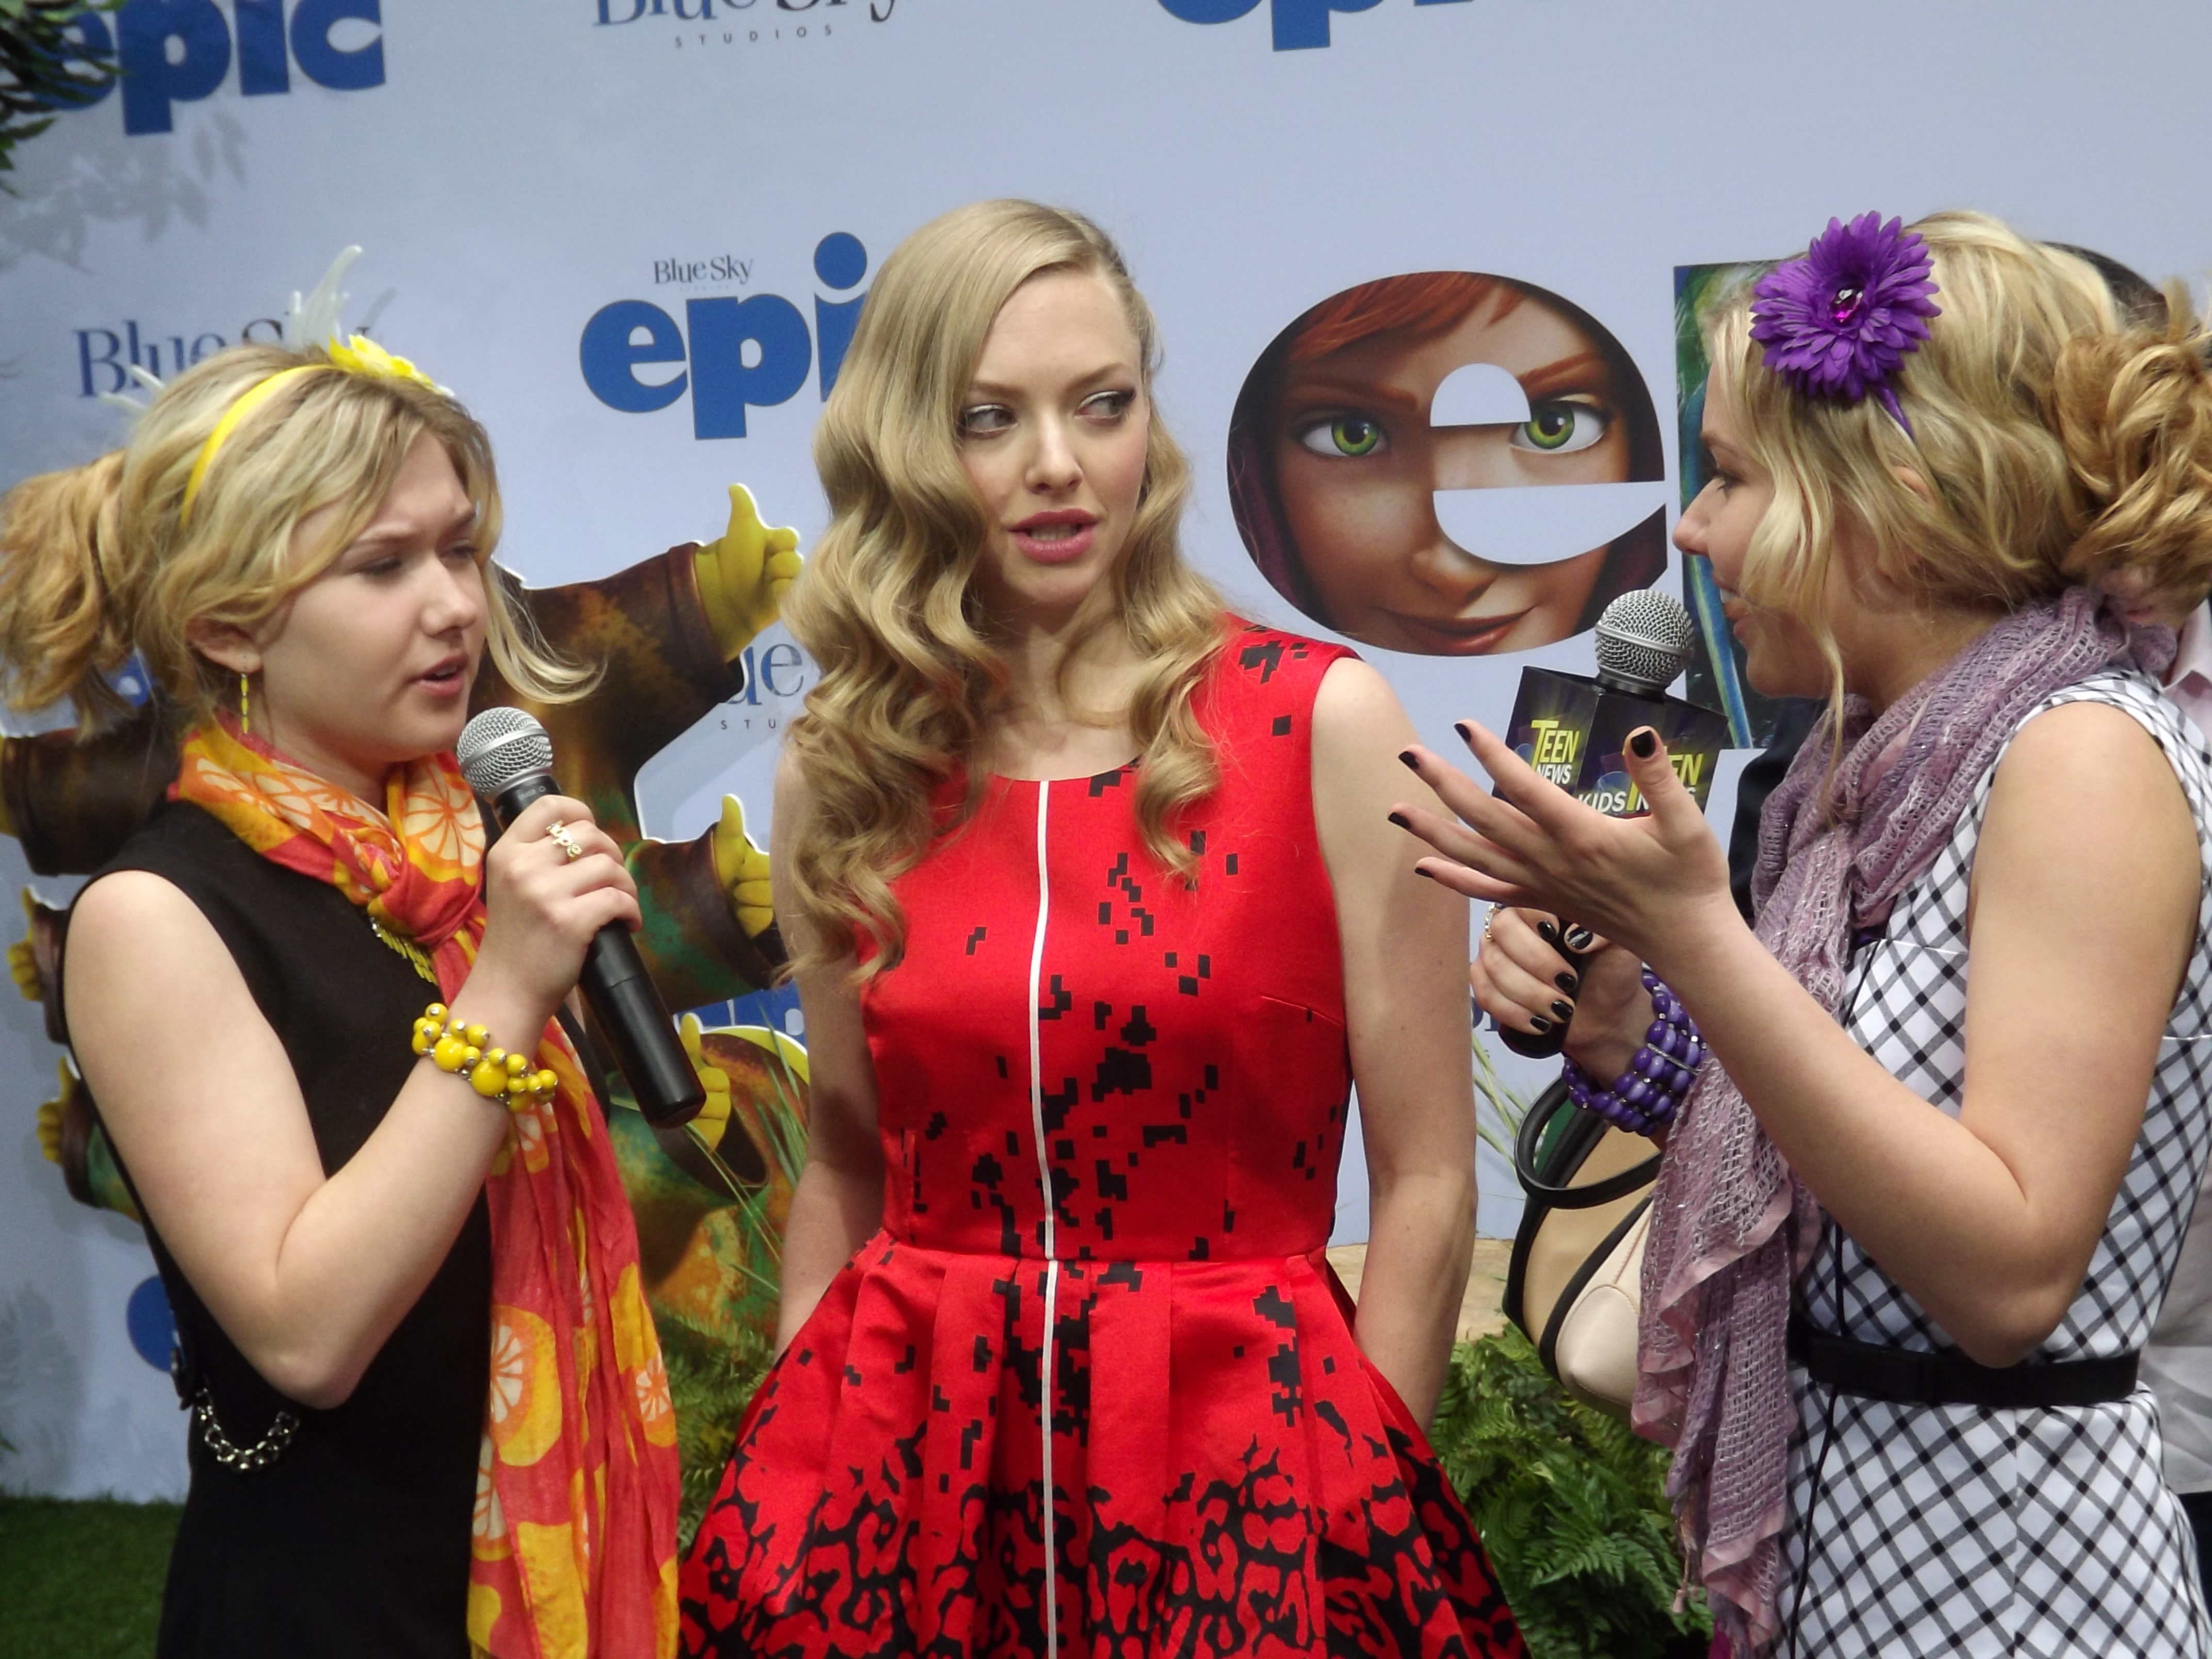 Cailin Loesch (right) and sister Hannah Loesch interviewing Amanda Seyfried at the NYC premiere of Epic